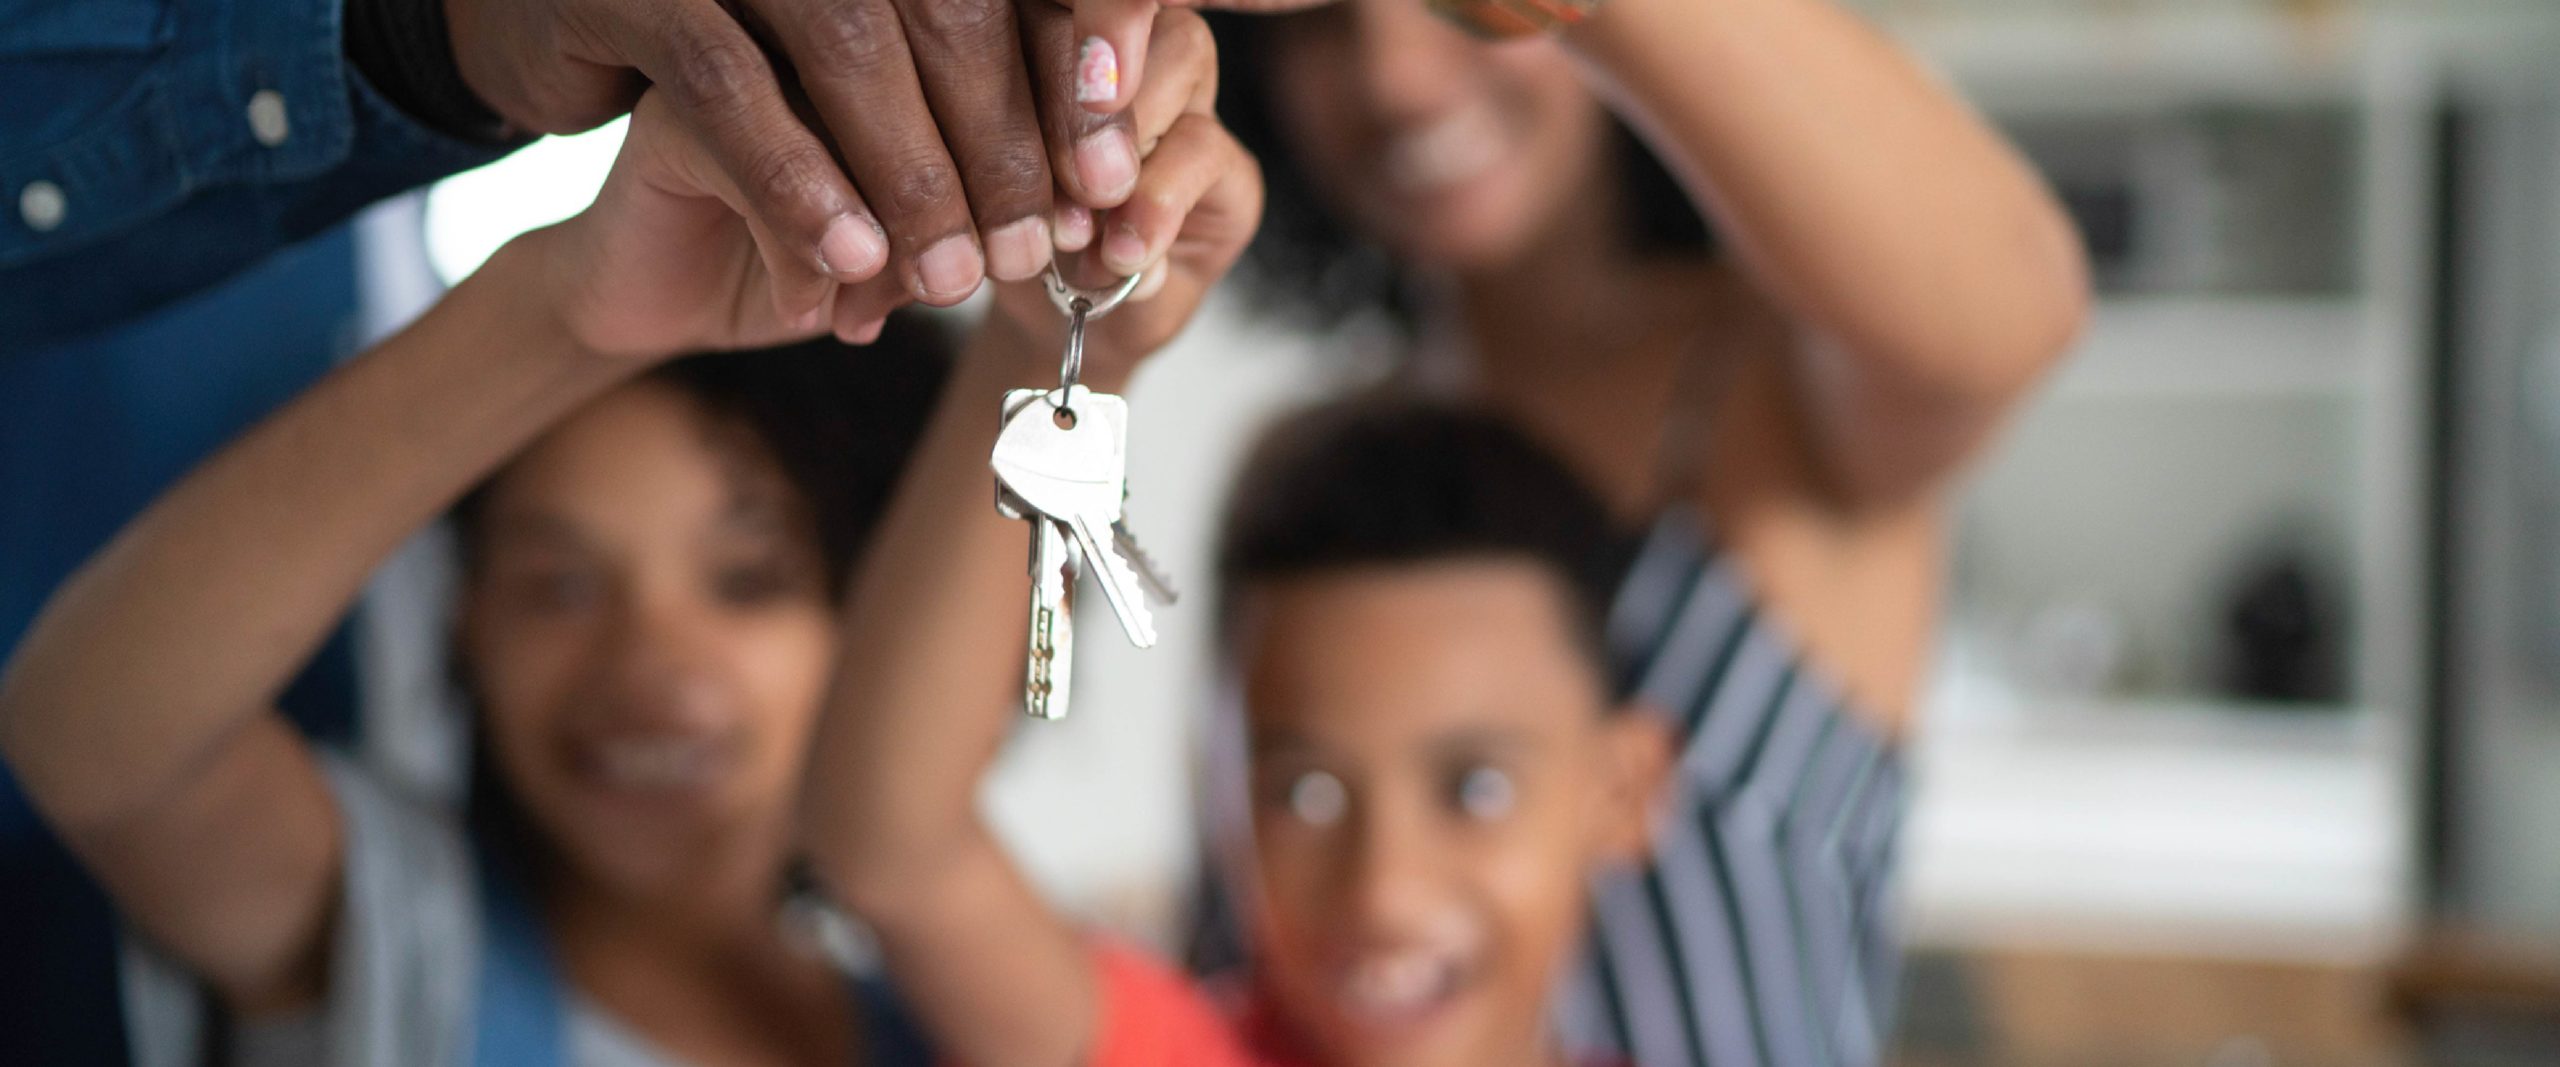 Latin family holding the keys of their new house